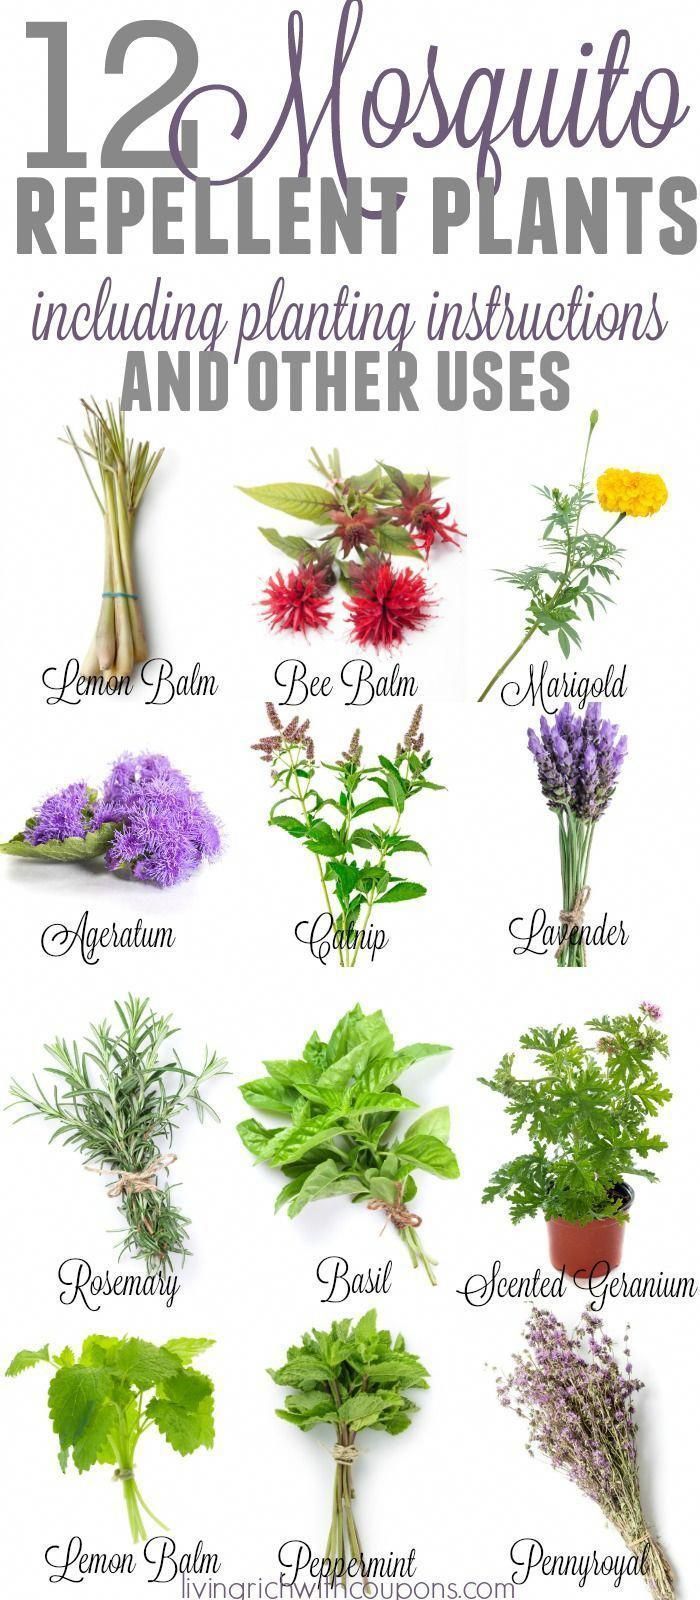 12 Awesome Mosquito Repellent Plants That Will Make You Go Outside Again -   25 plants Growing backyards
 ideas